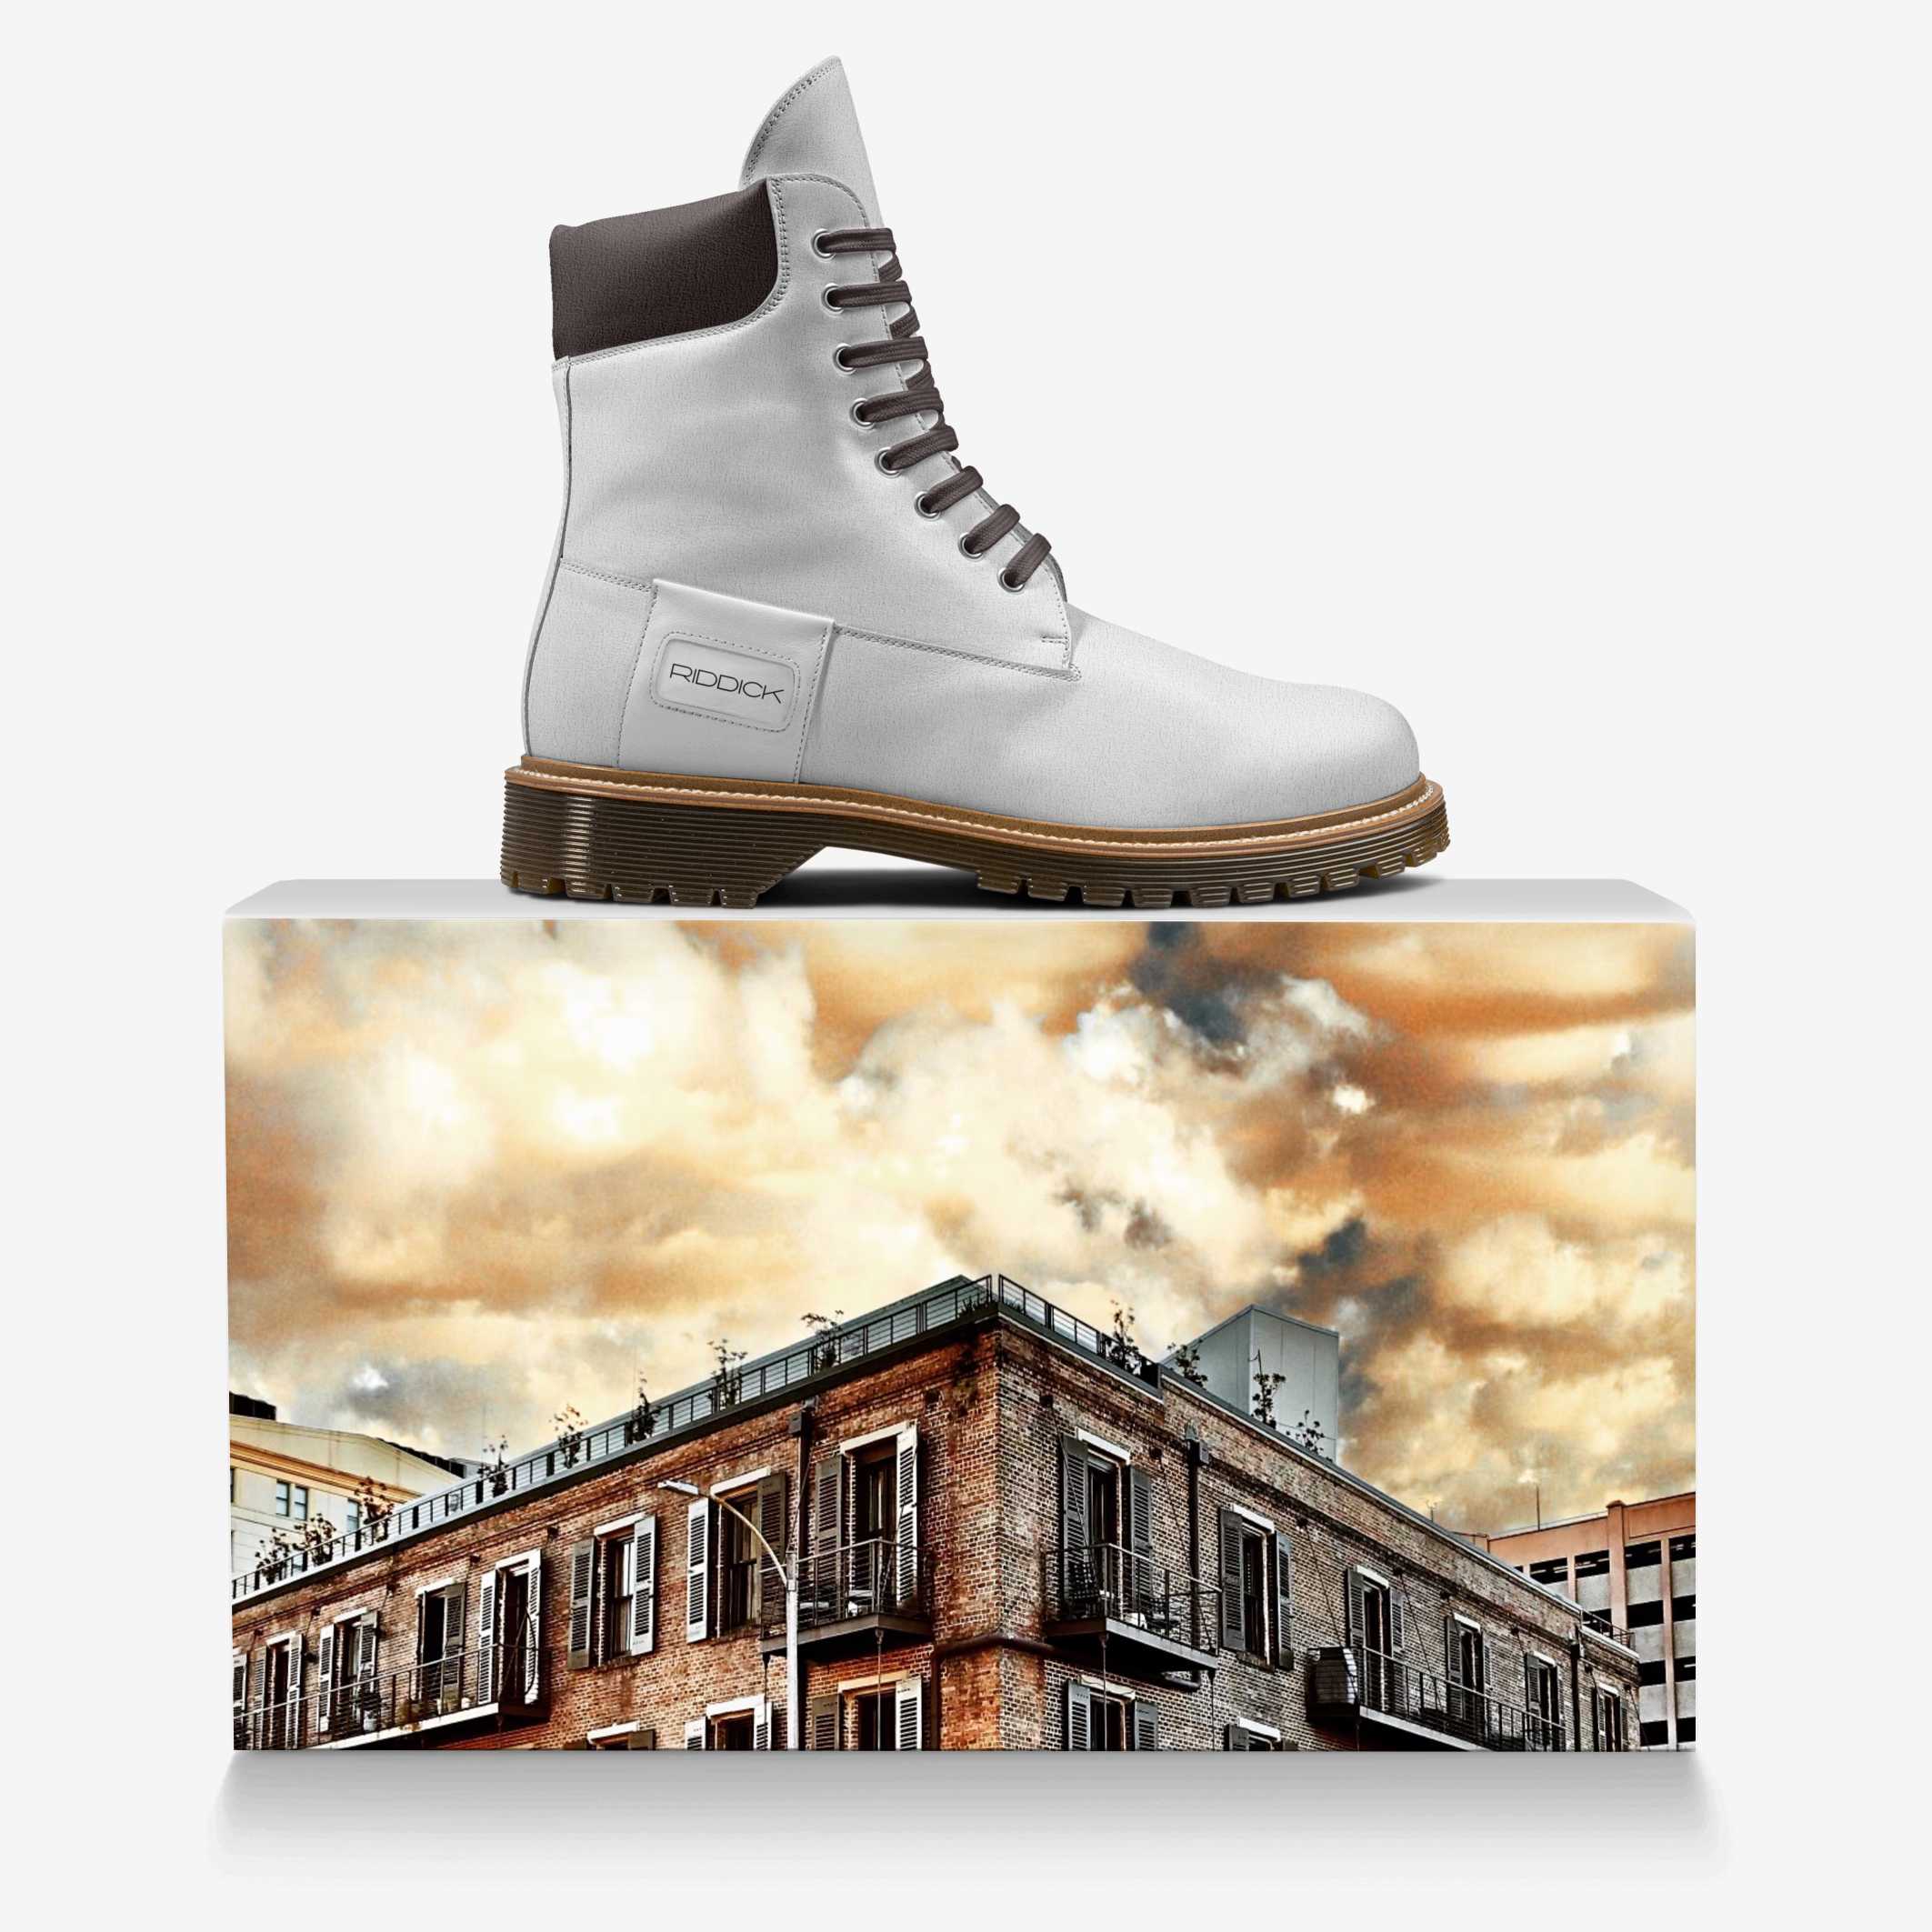 RED DAWN WHT - Riddick Shoes Shoe Riddick Shoes   